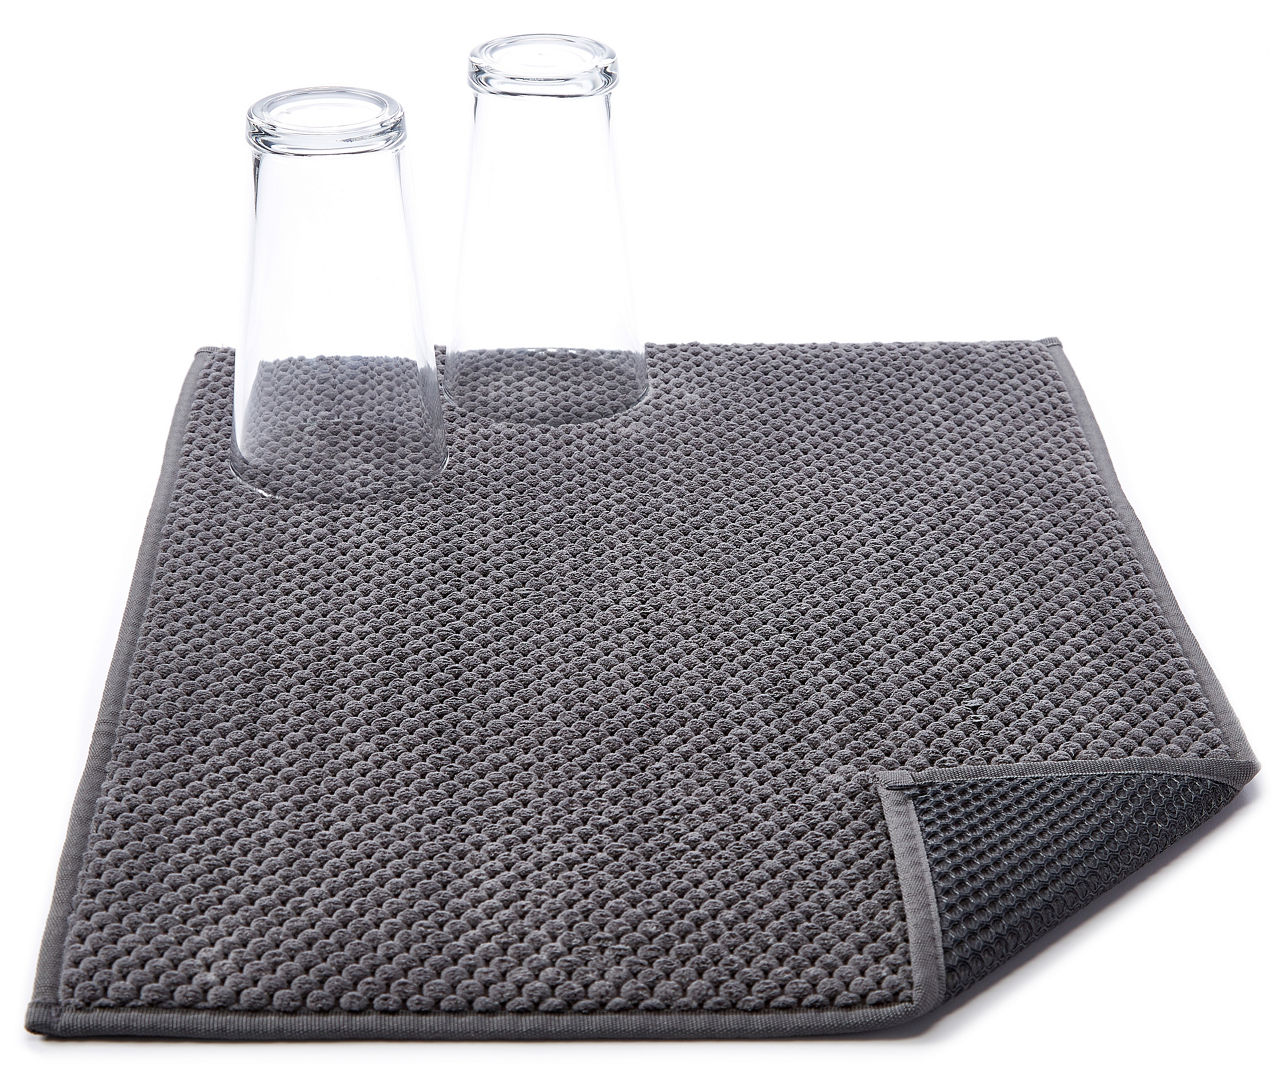 This On-Sale Microfiber Dish Mat Protects Countertops from Water